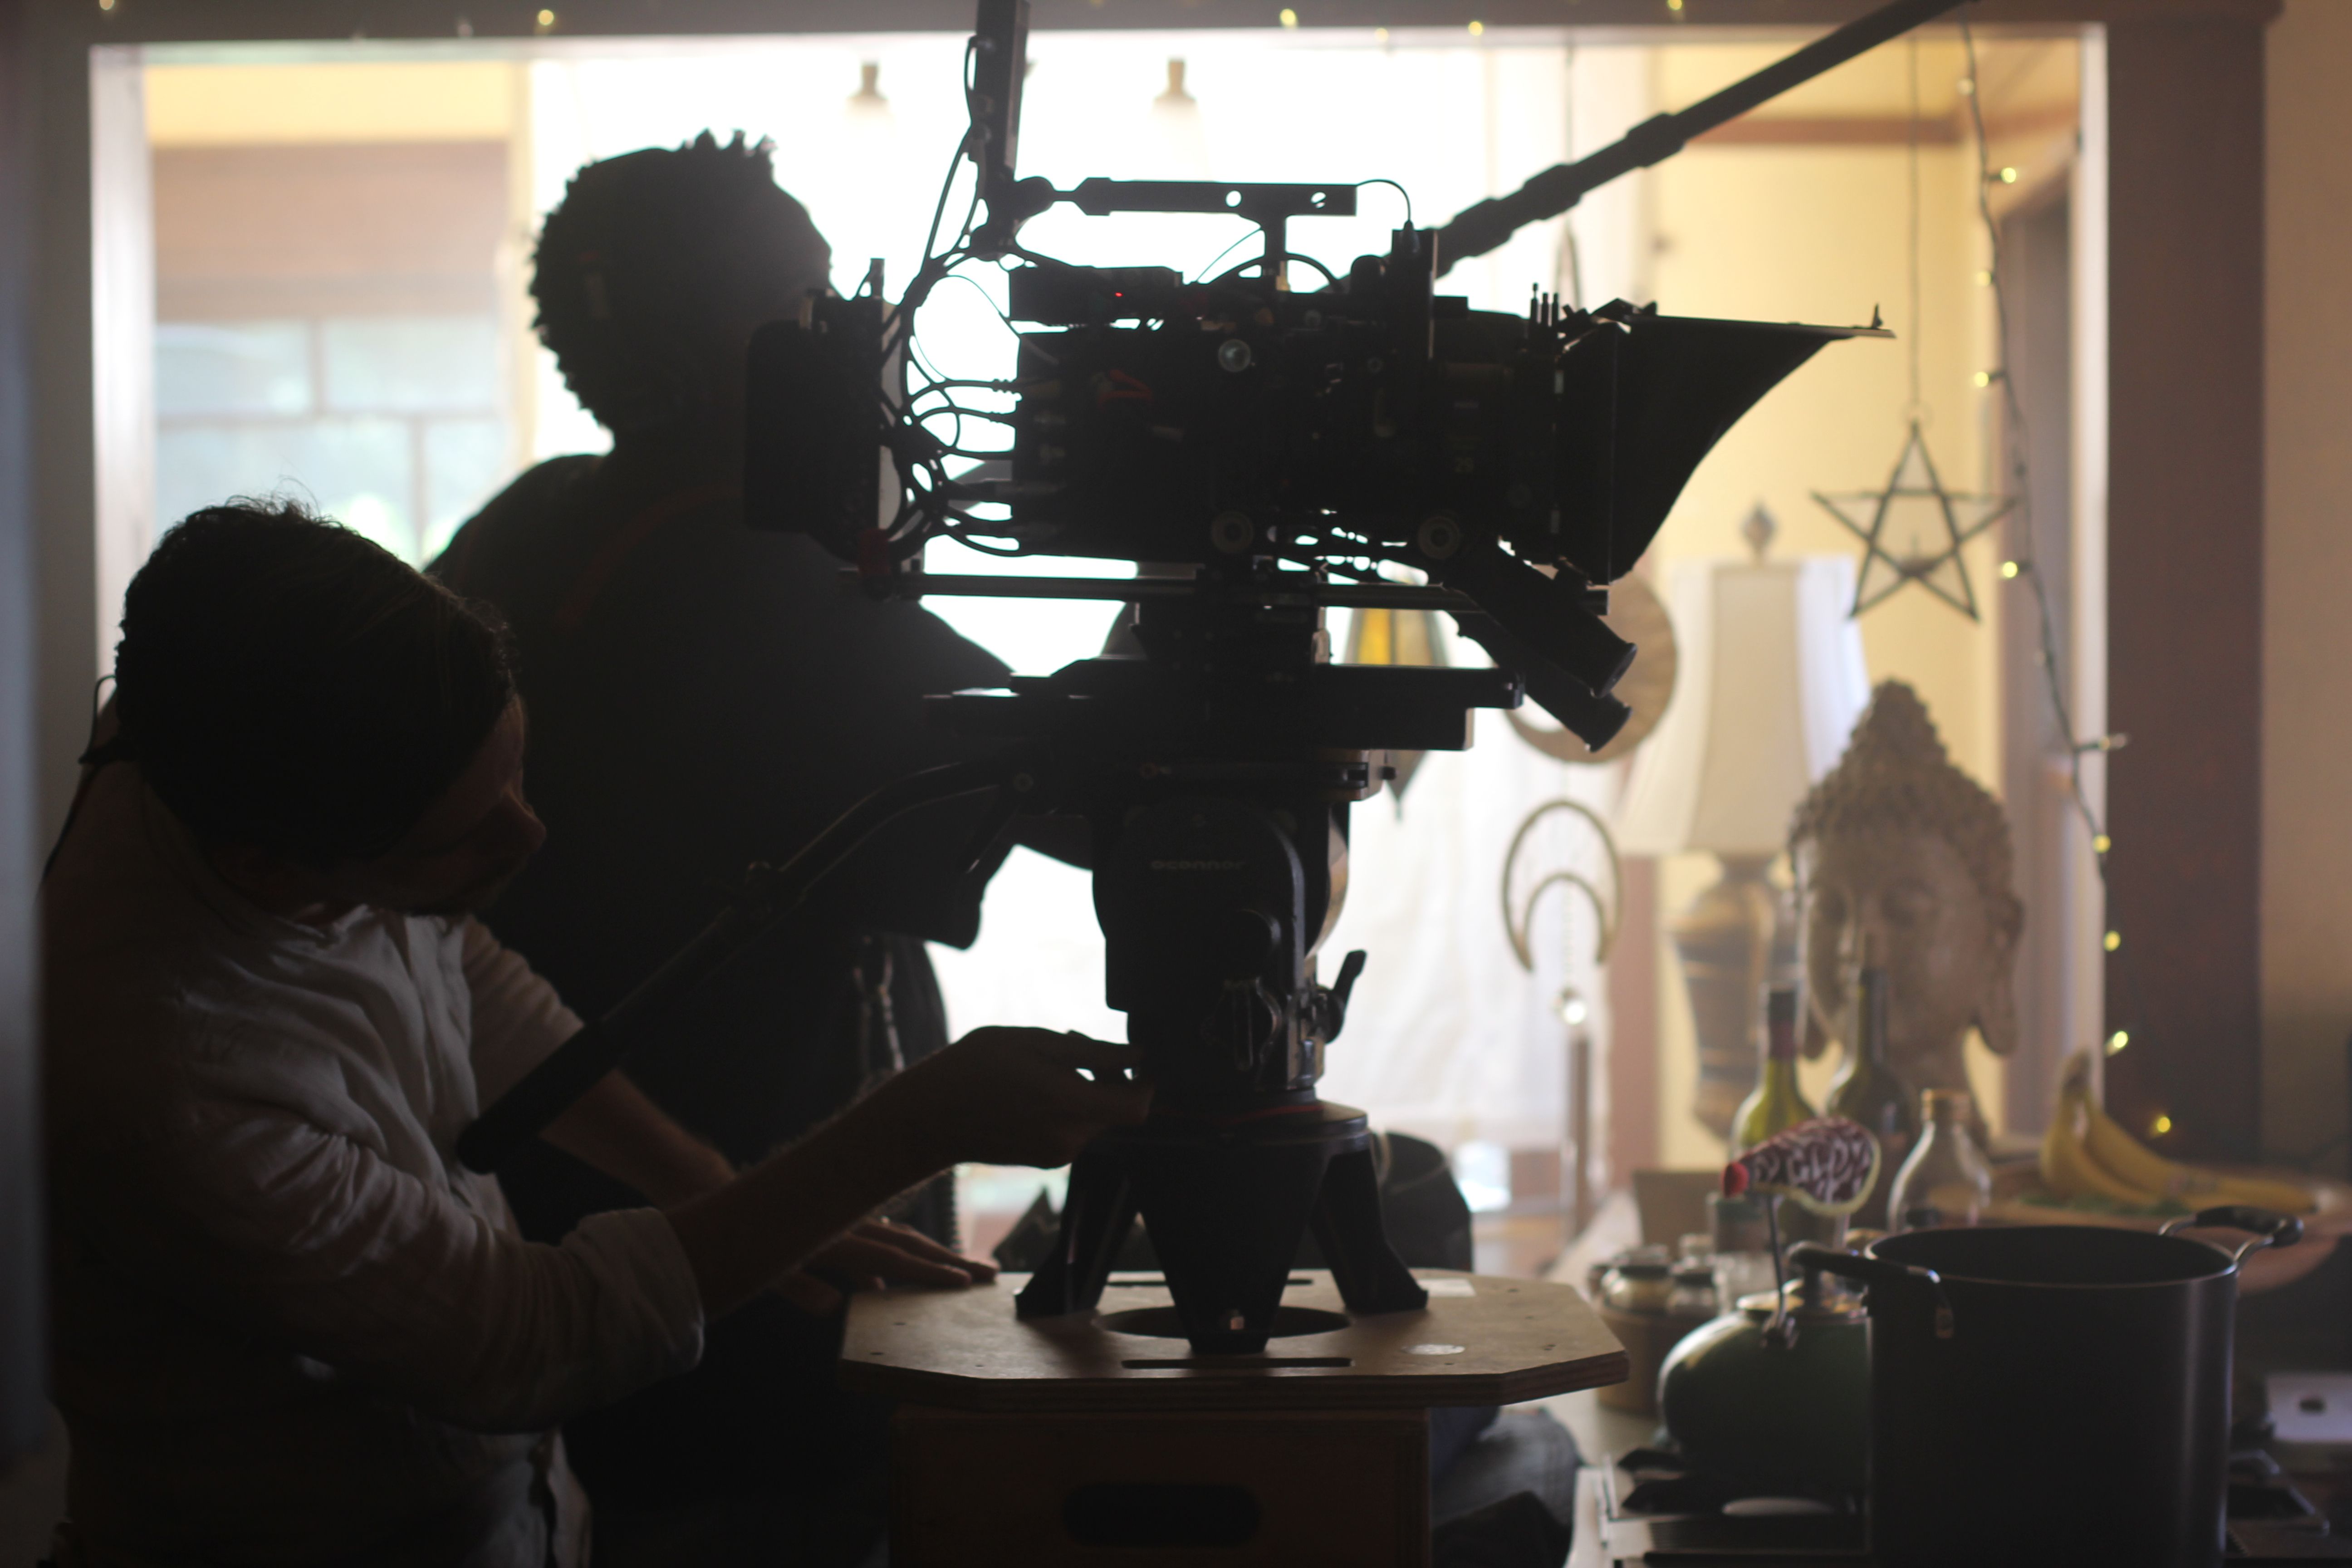 A film crew on the set of a film written and directed by Ryan Welsh